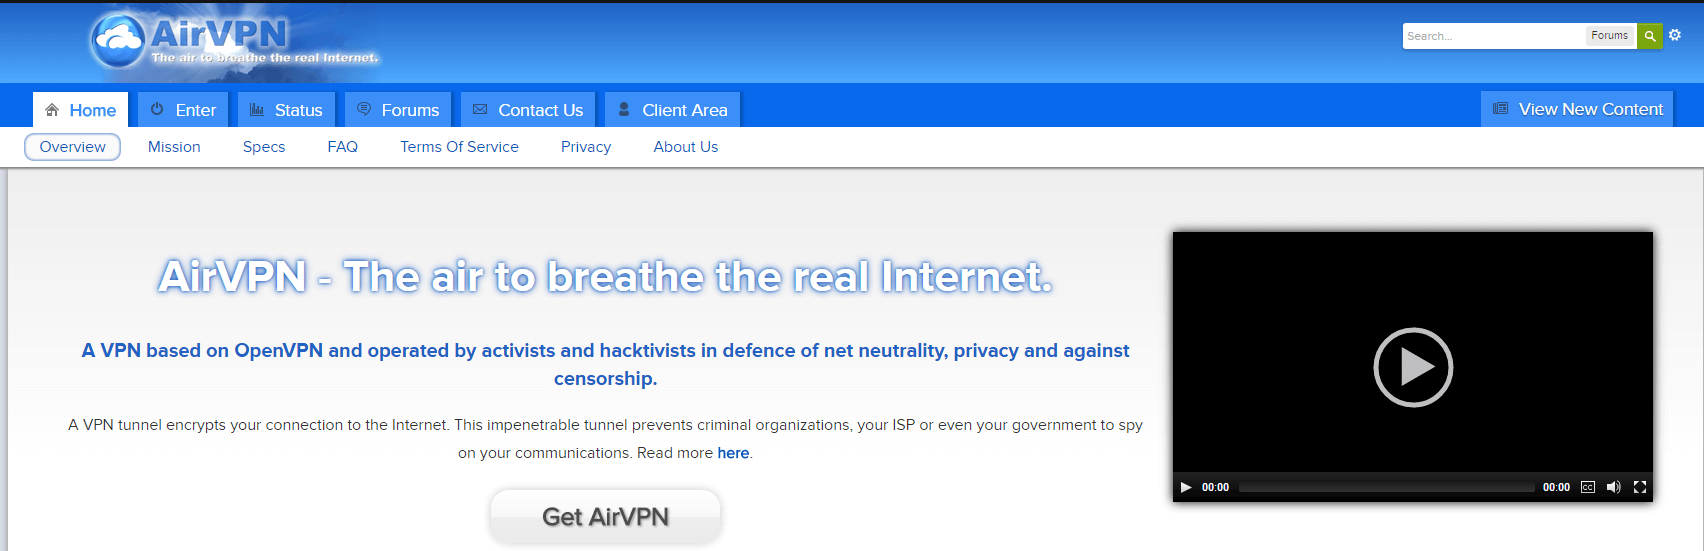 Just Revealed Details About AirVPN